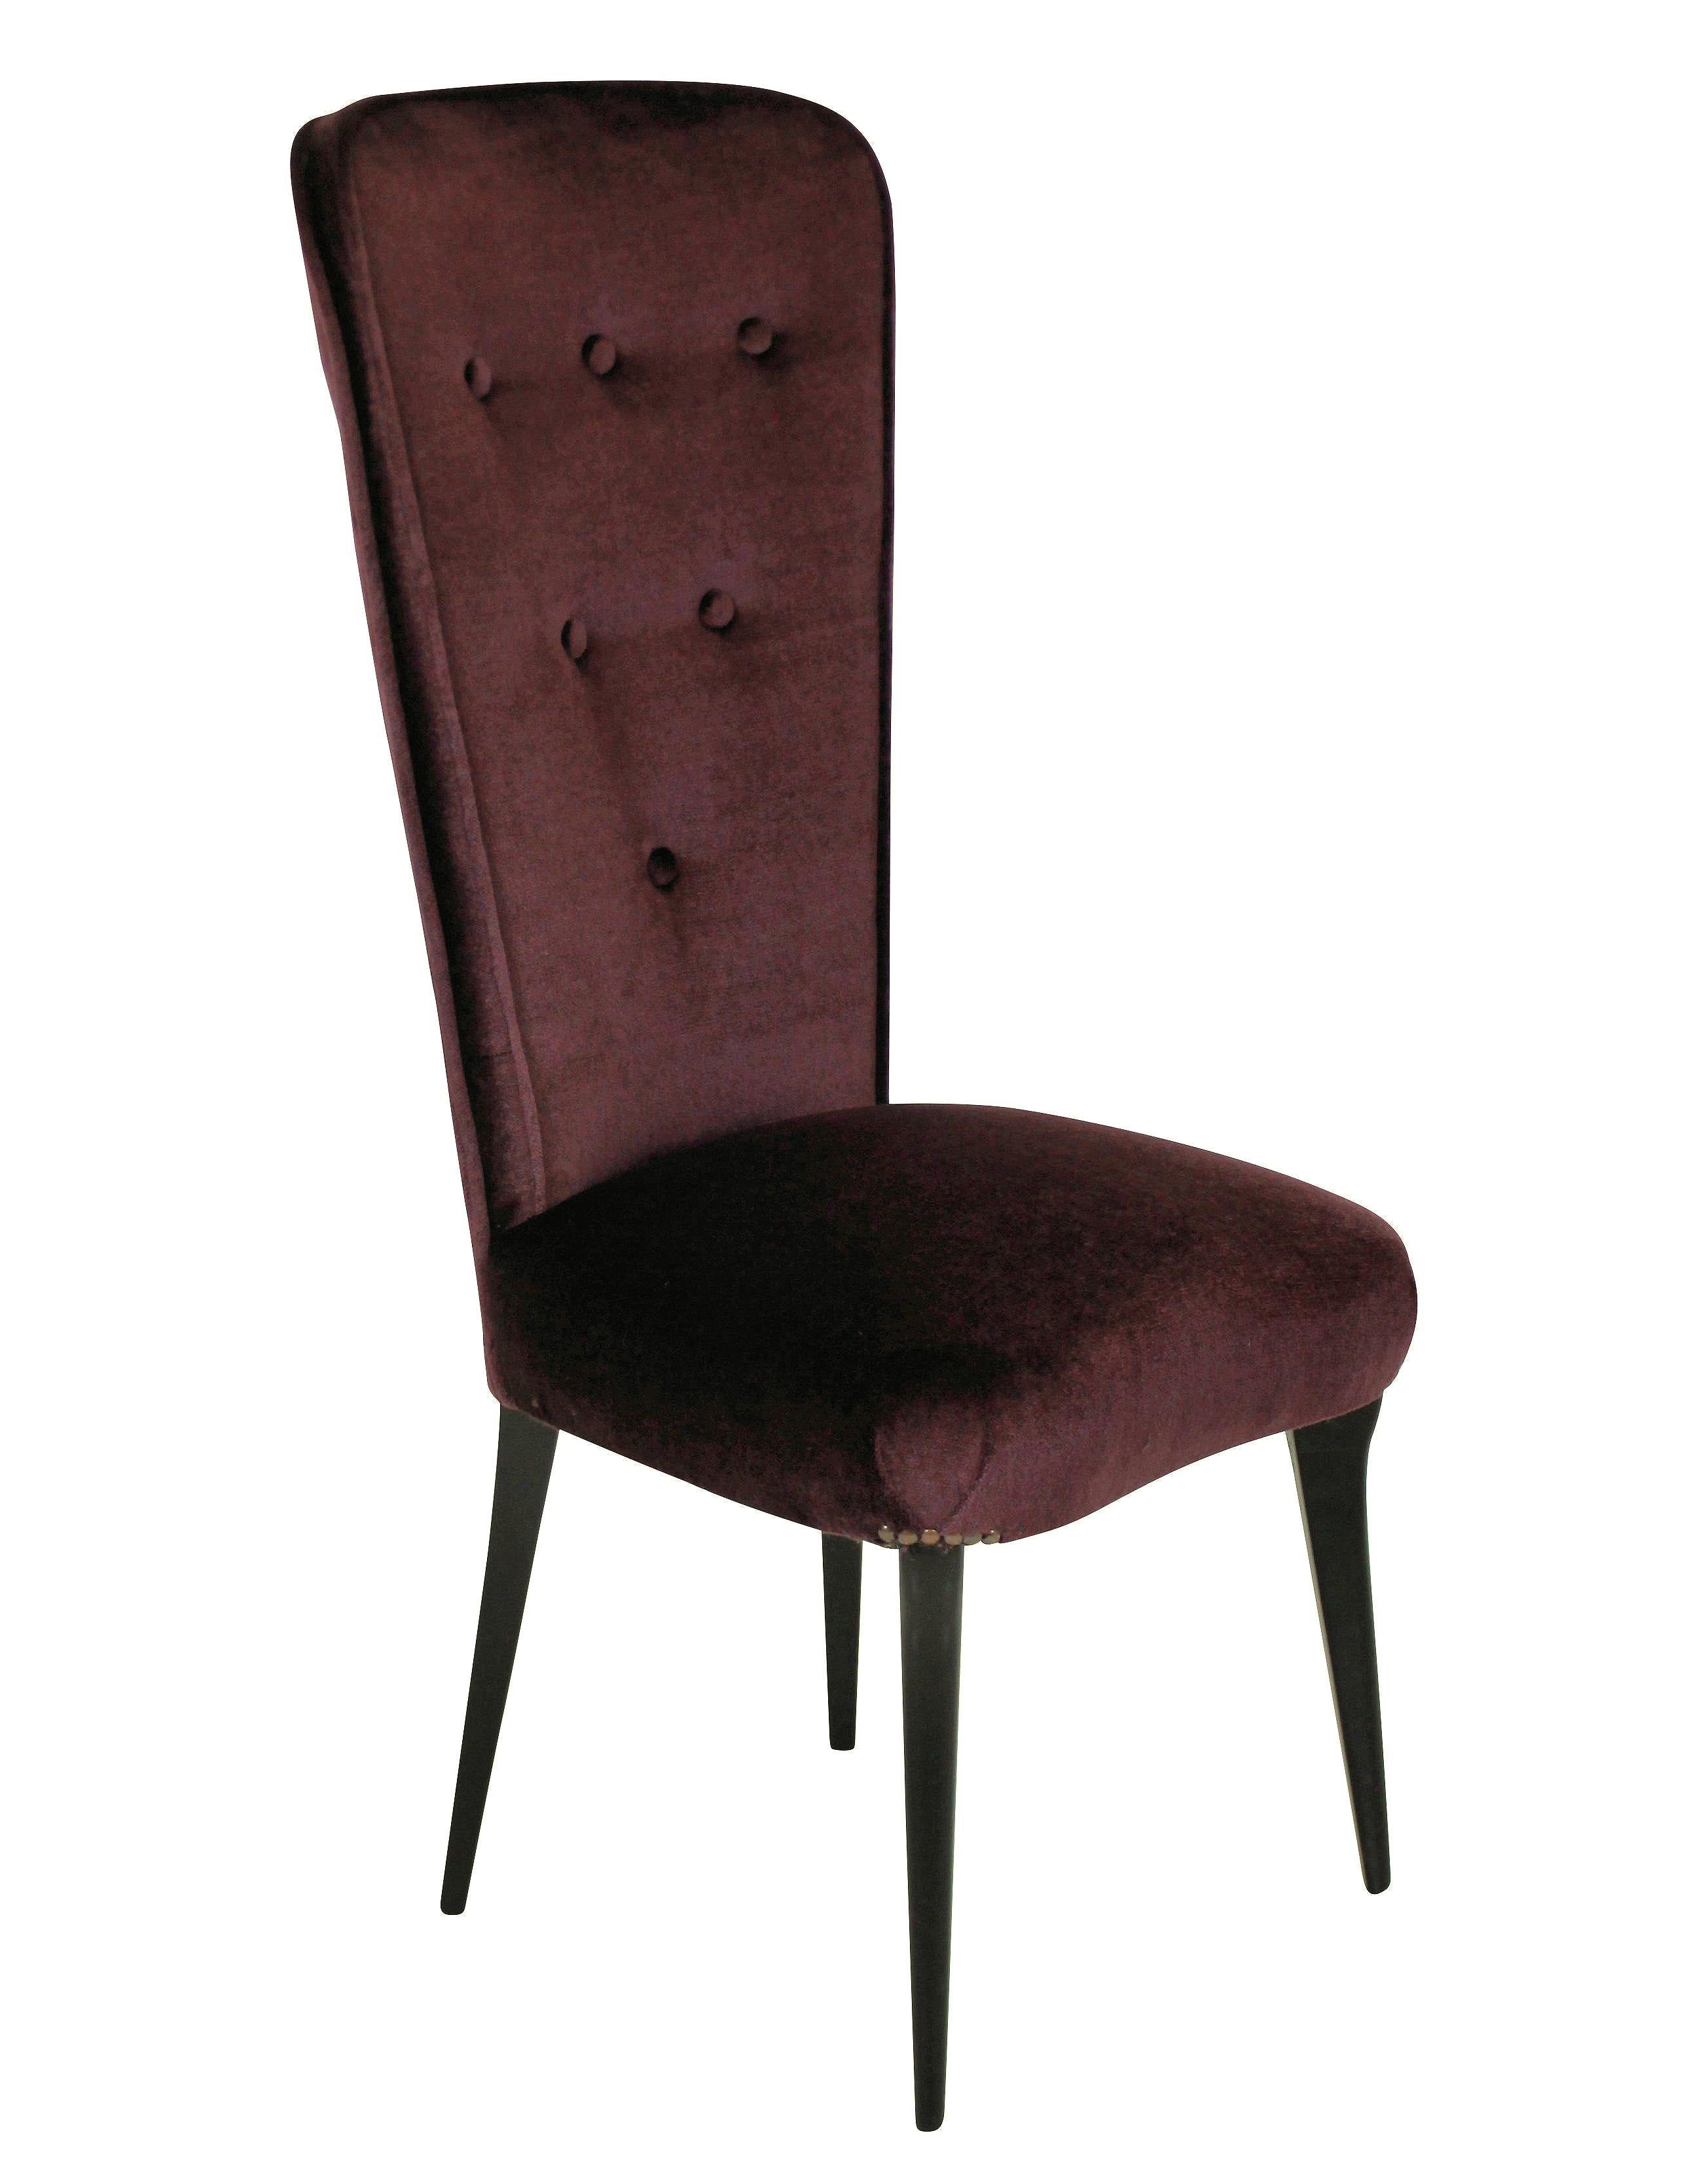 A pair of stylish Italian bedroom chairs with high buttoned backs and ebonized legs. Newly upholstered in aubergine mohair velvet.